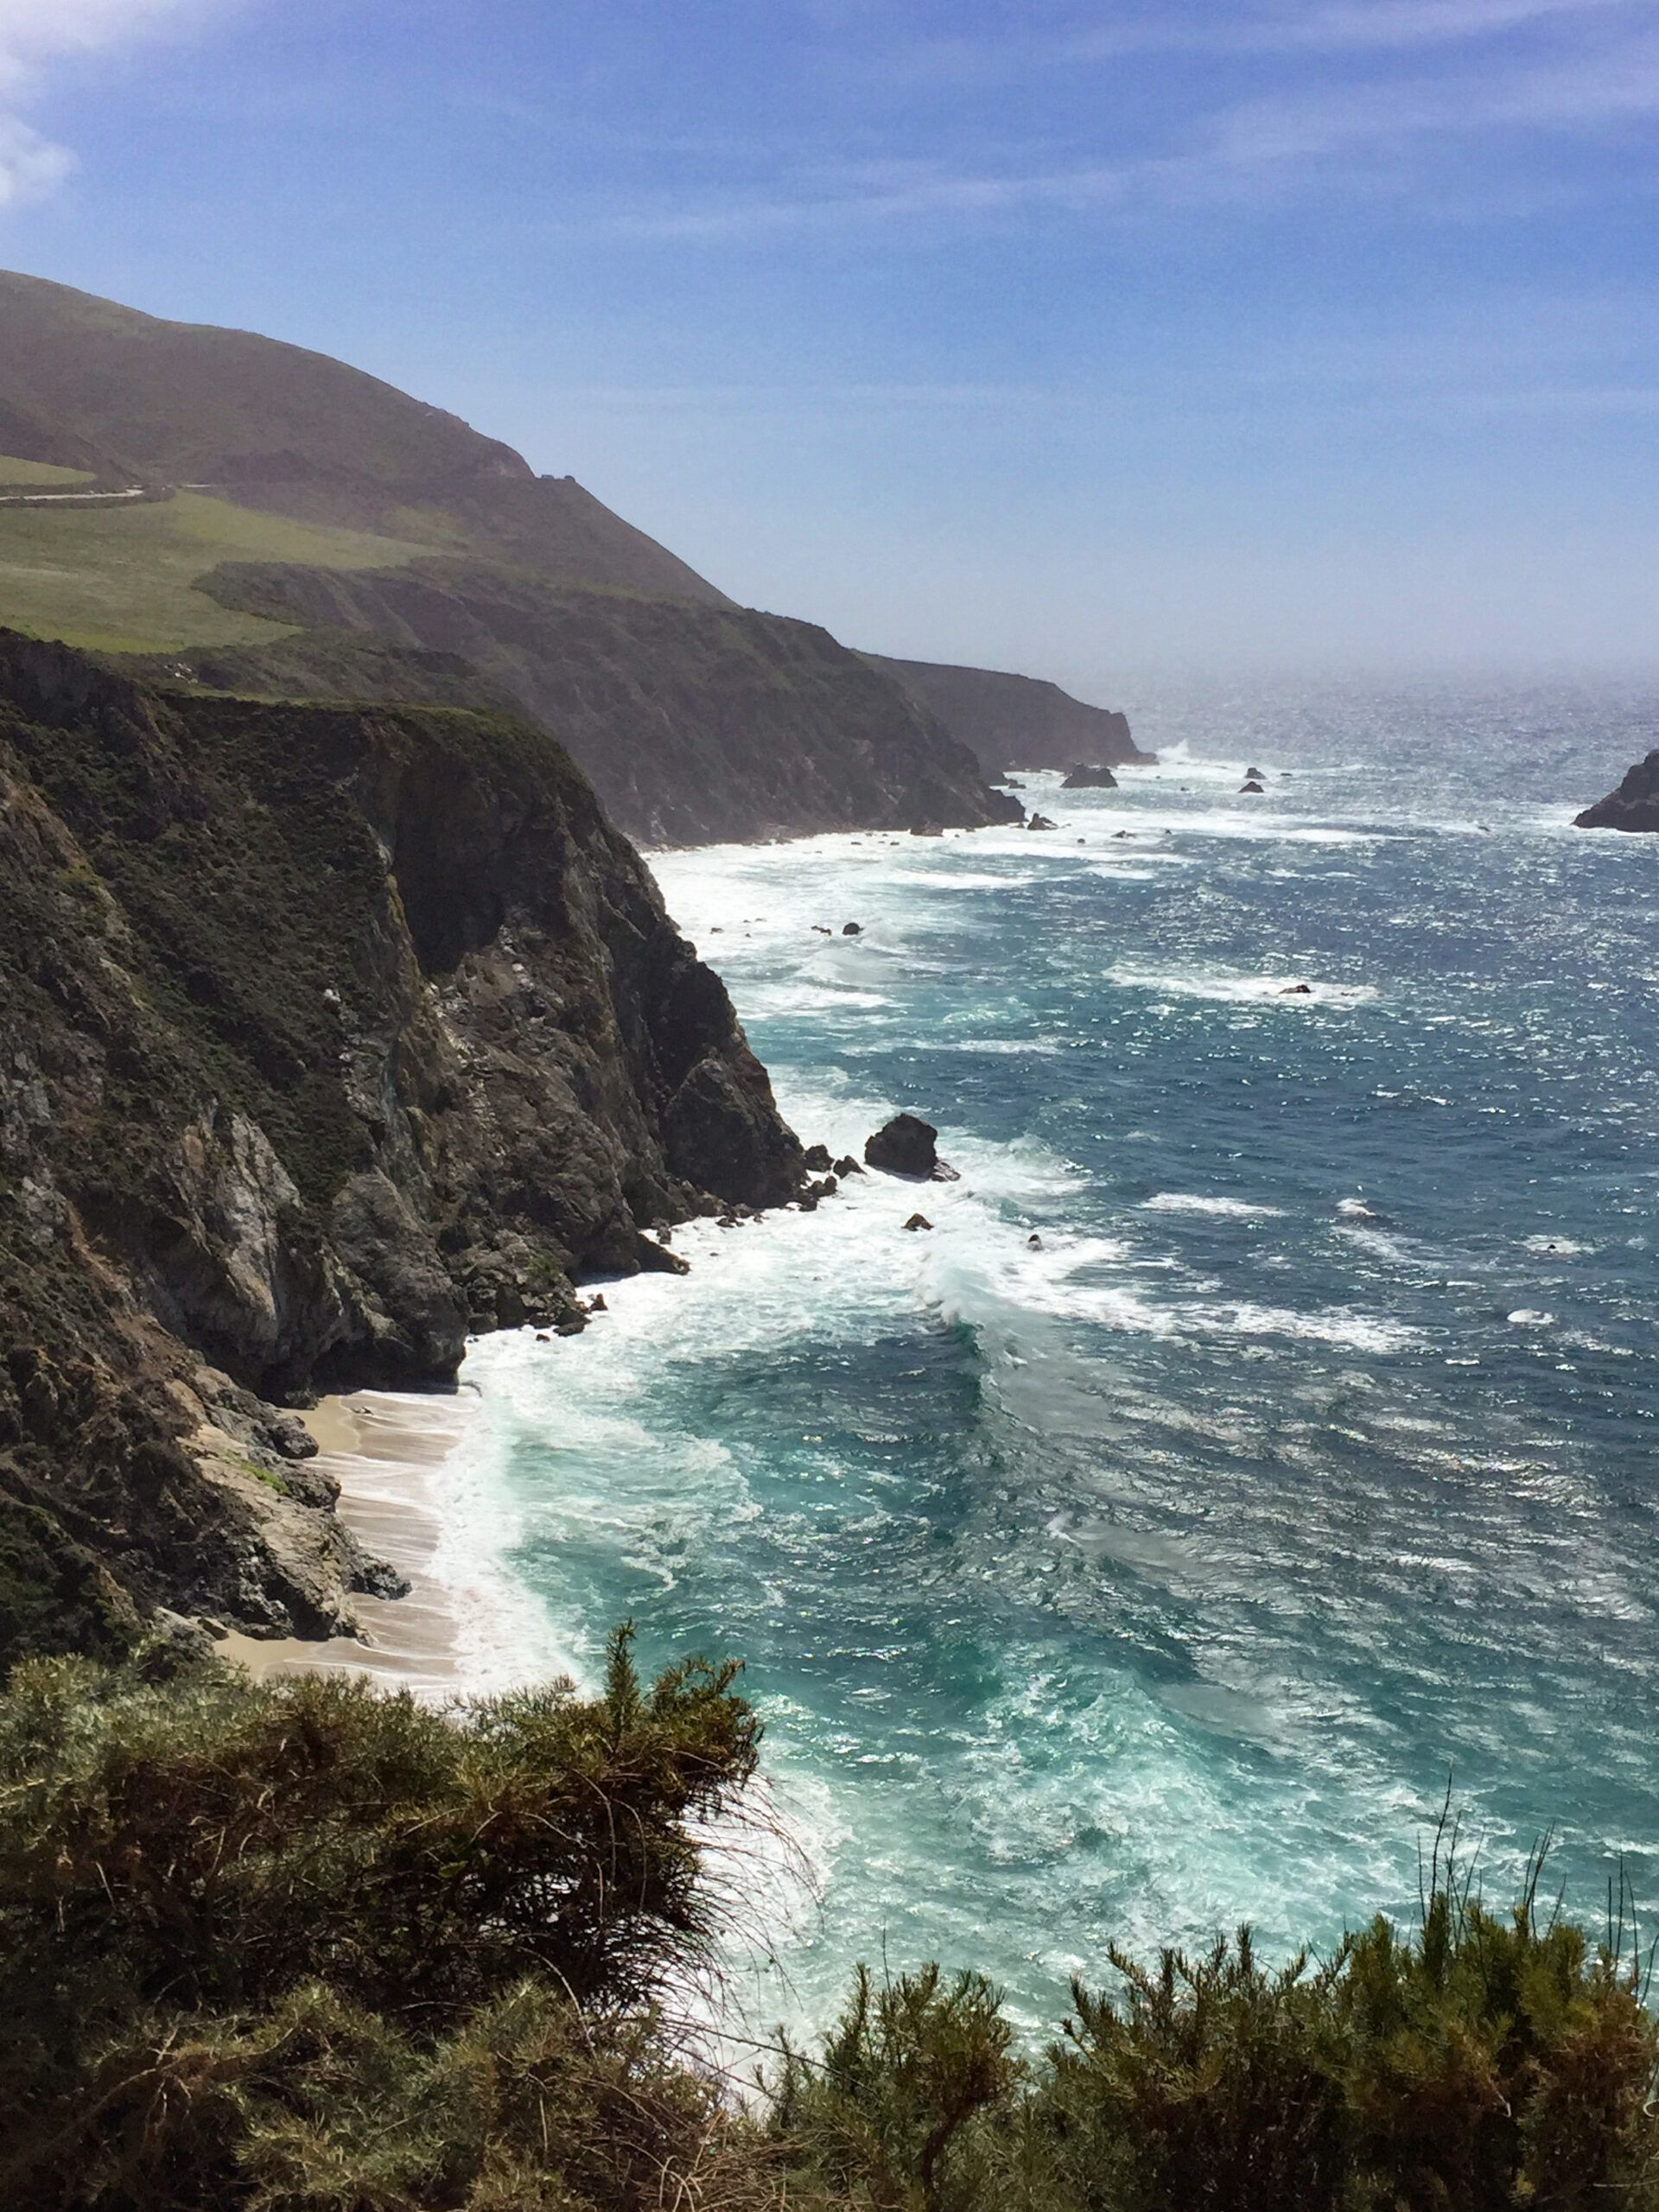 The surf pounds against the rising cliffs in Big Sur.